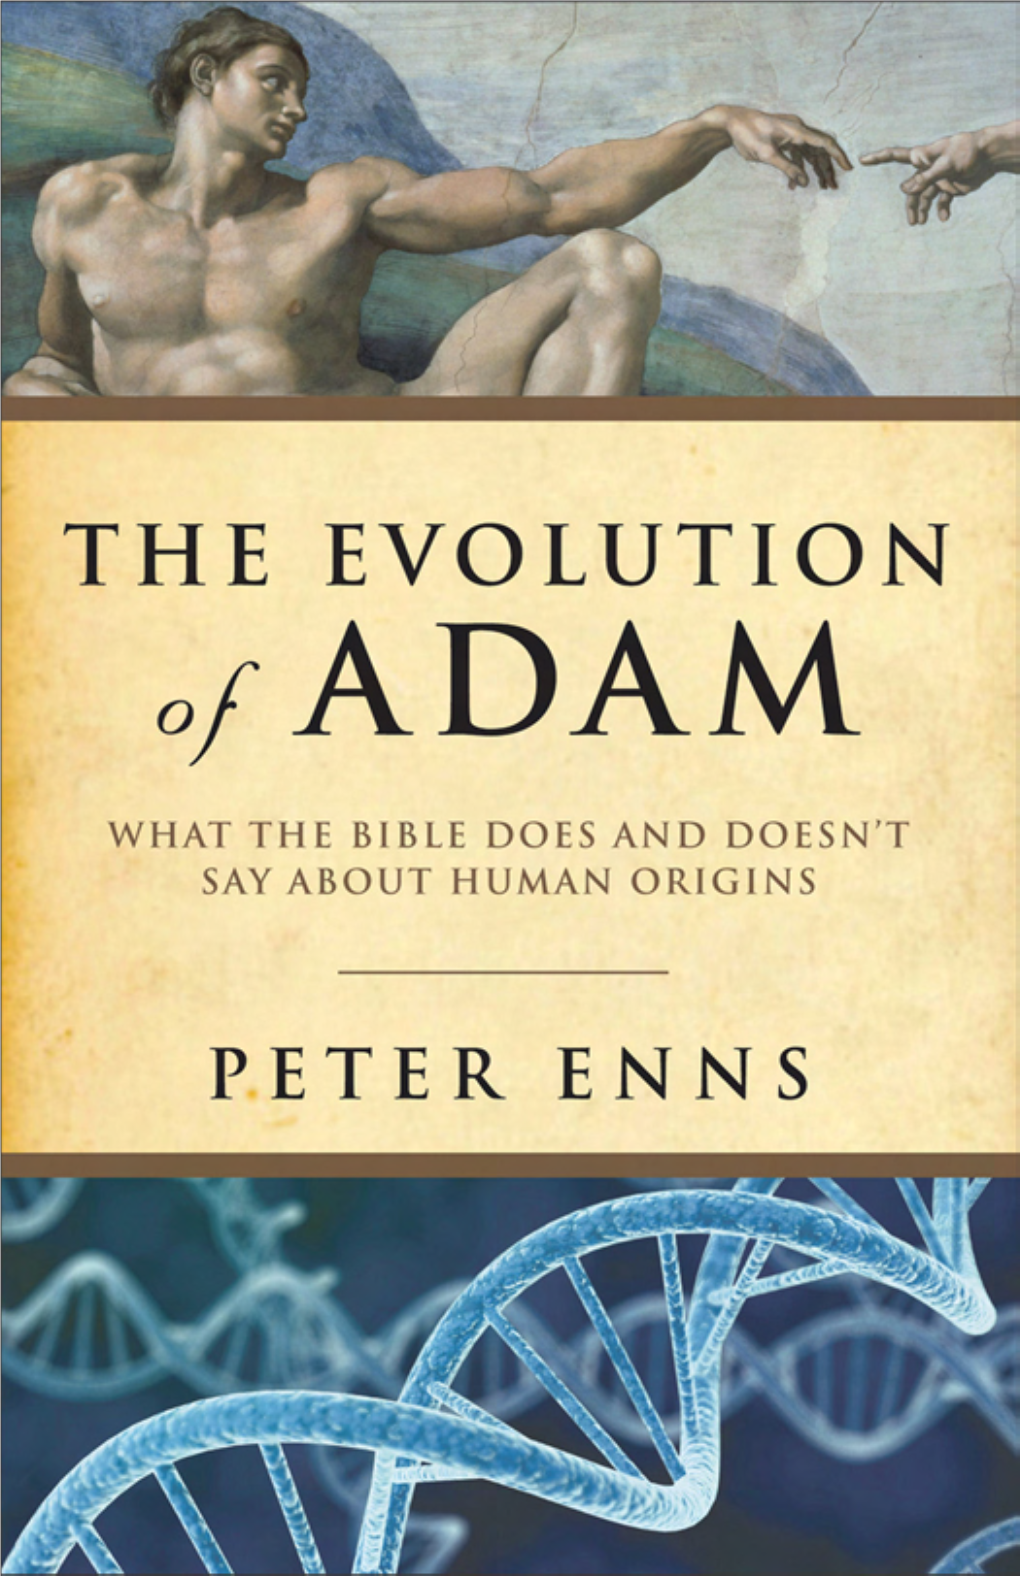 Peter Enns Confronts These Problems with Remarkable Clarity and Courage, Offering a Solution That Is Both Biblically and Scientifi- Cally Informed.” —Edward B